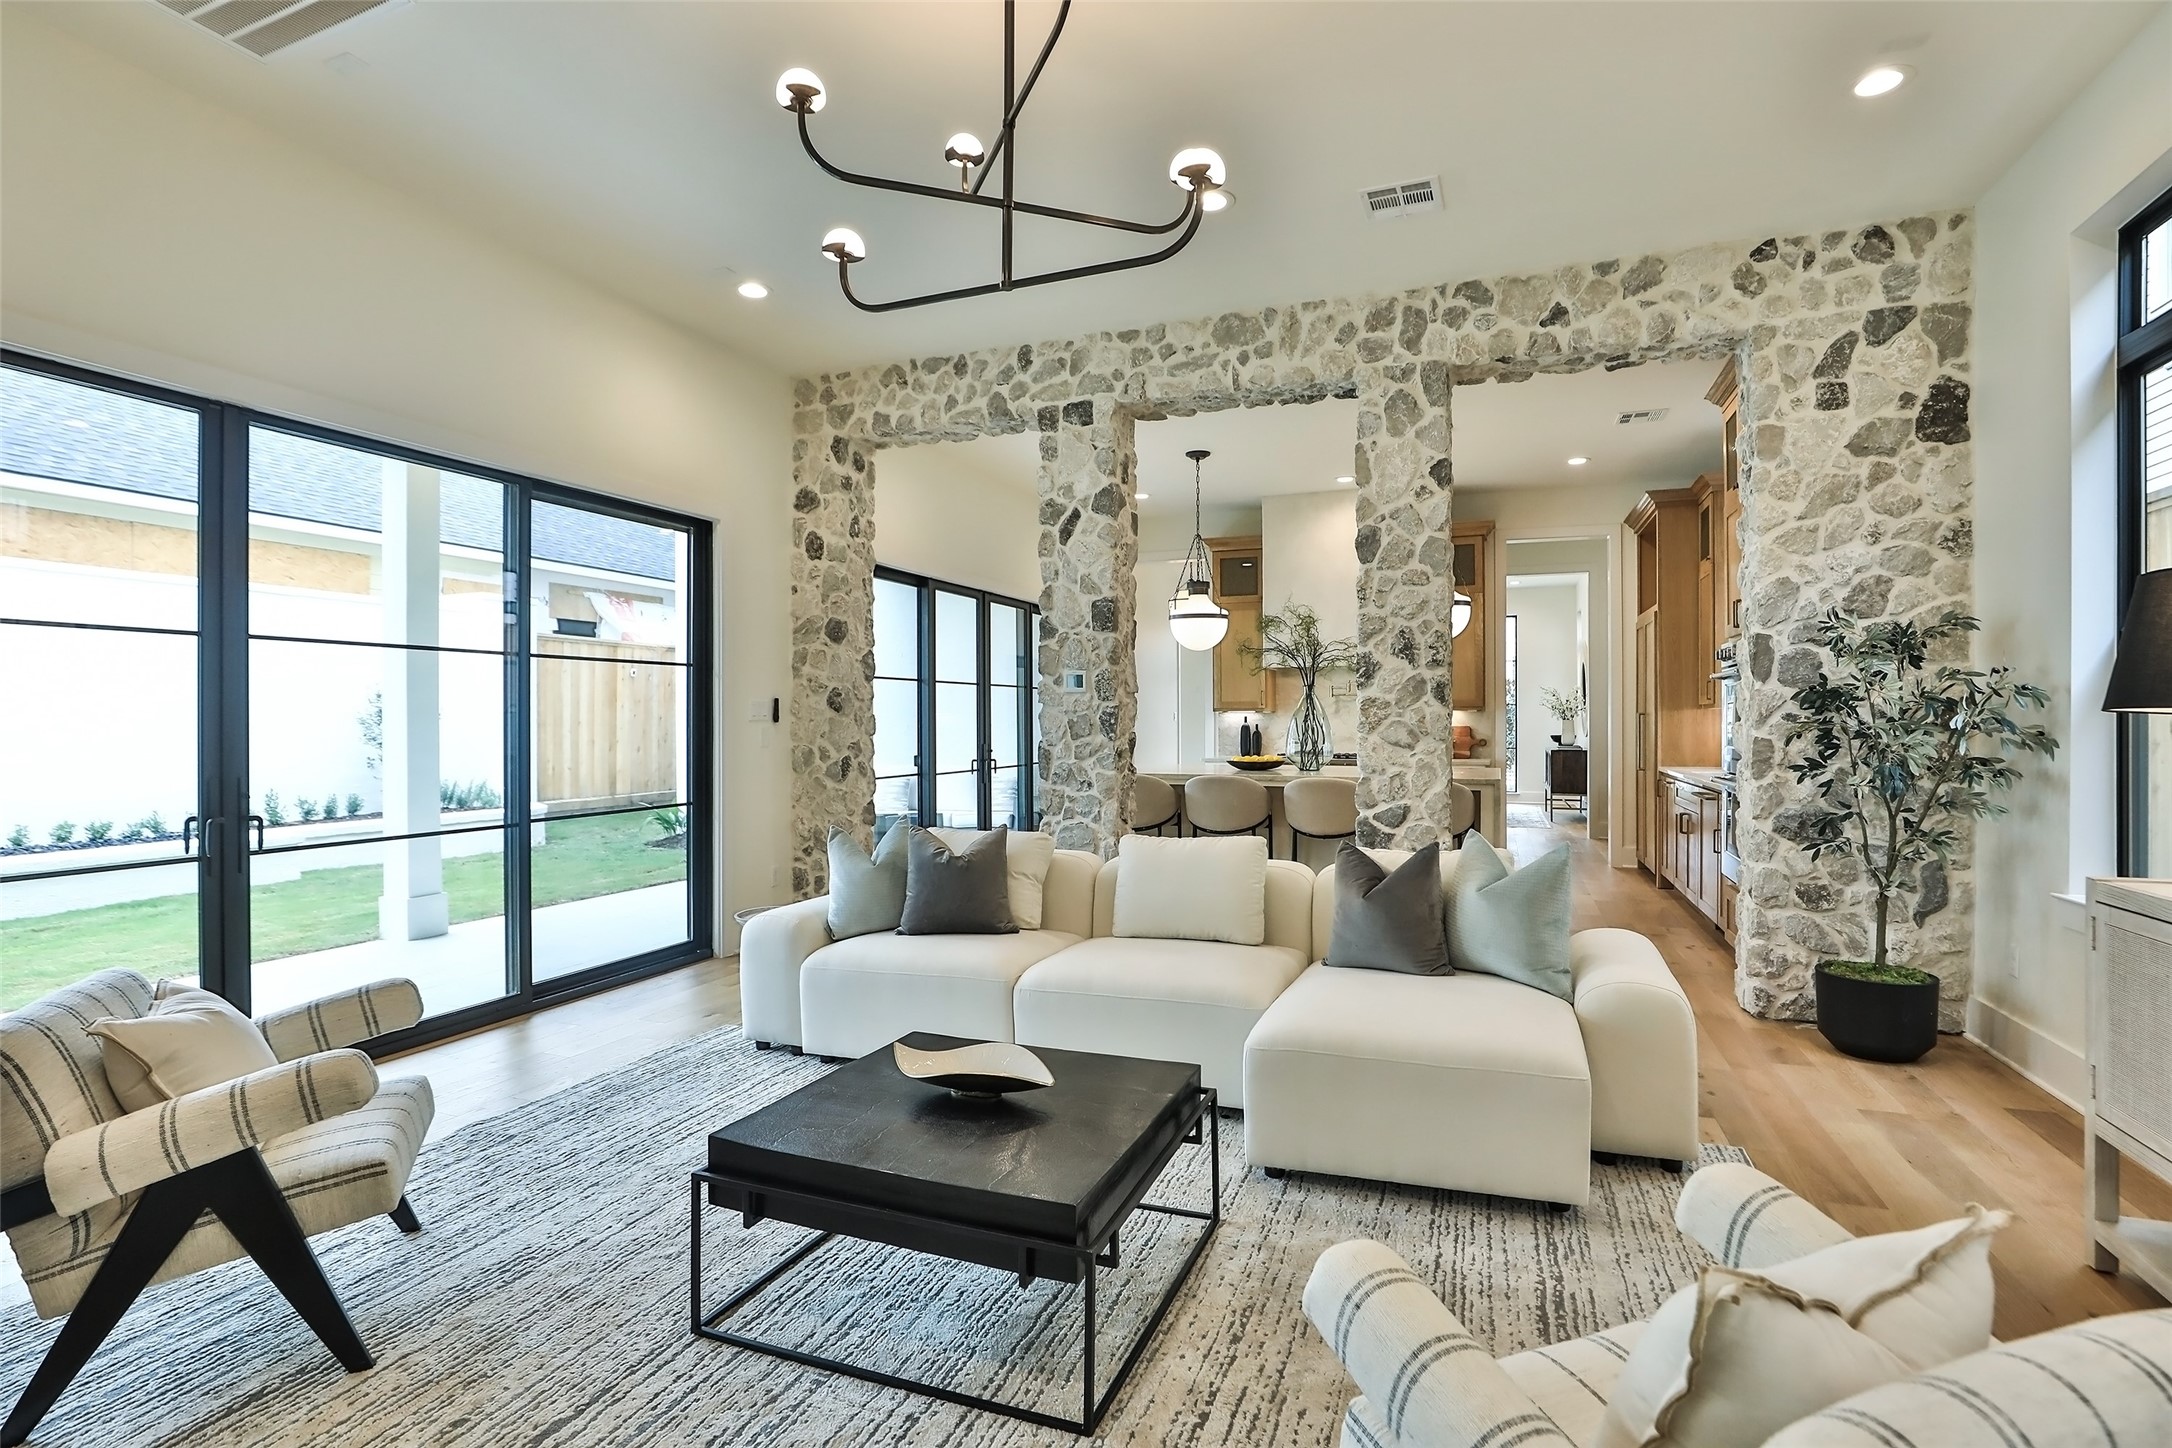 The living room has a wall of glass with Marvin Fiberglass patio doors that open to the patio. The room has an elegant chandelier to complement the White Oak wood floors.